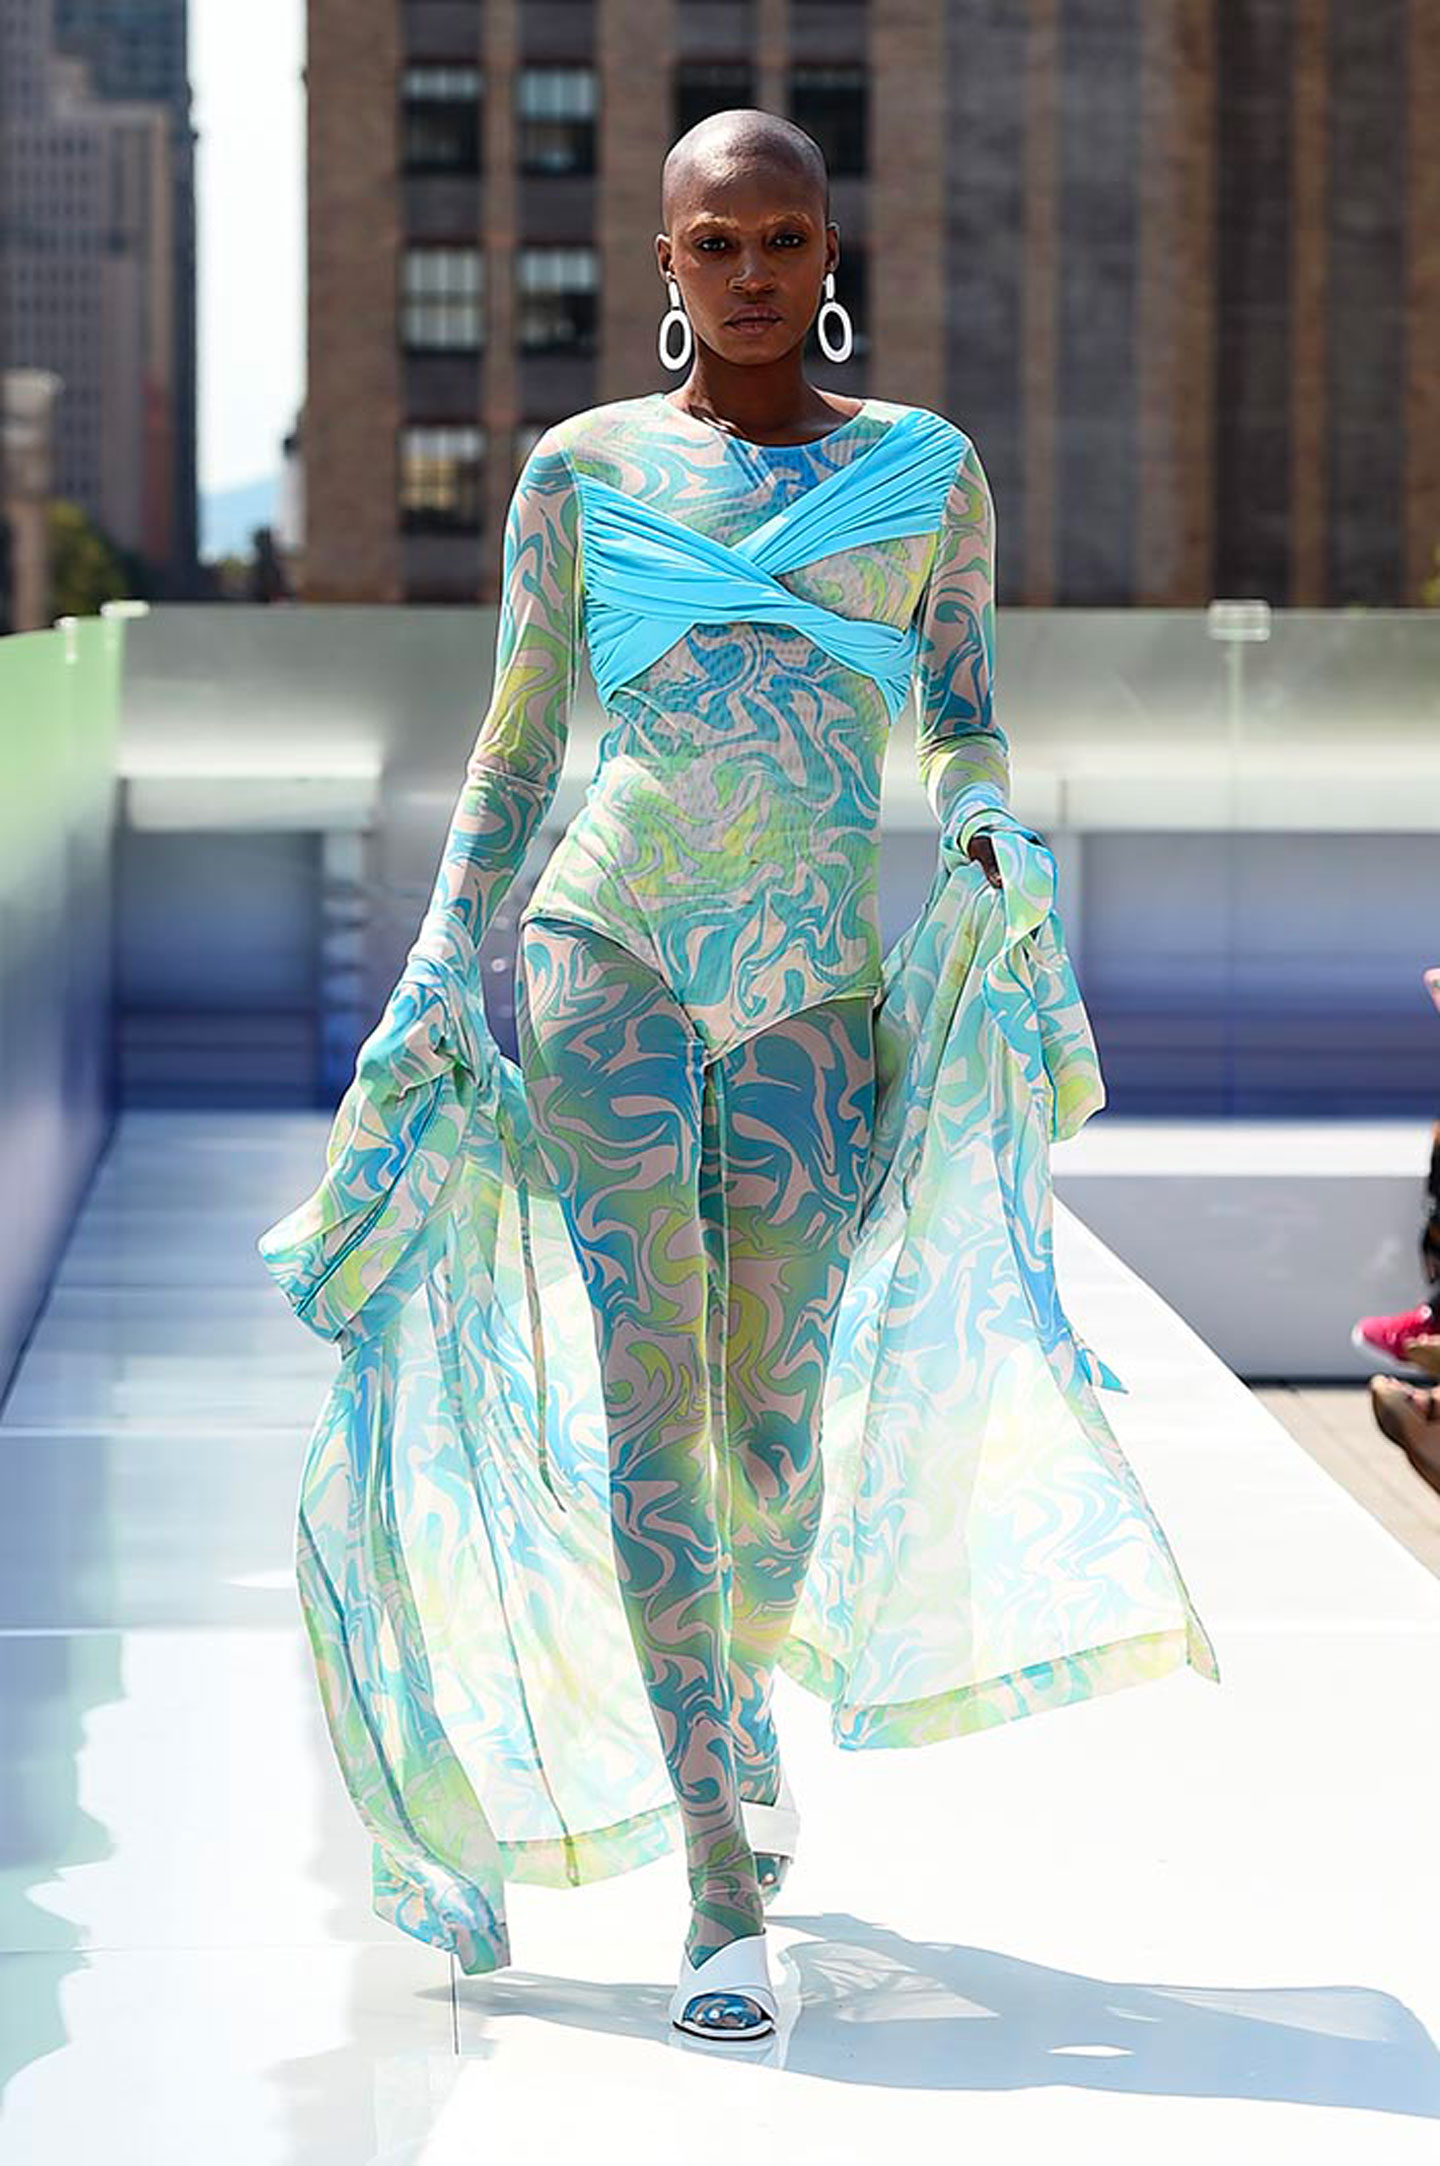 Soubi Studios participated on the Flying Soho New York Fashion Week 2021 with a Resort Collection that featured very fresh, colorful and energetic pieces